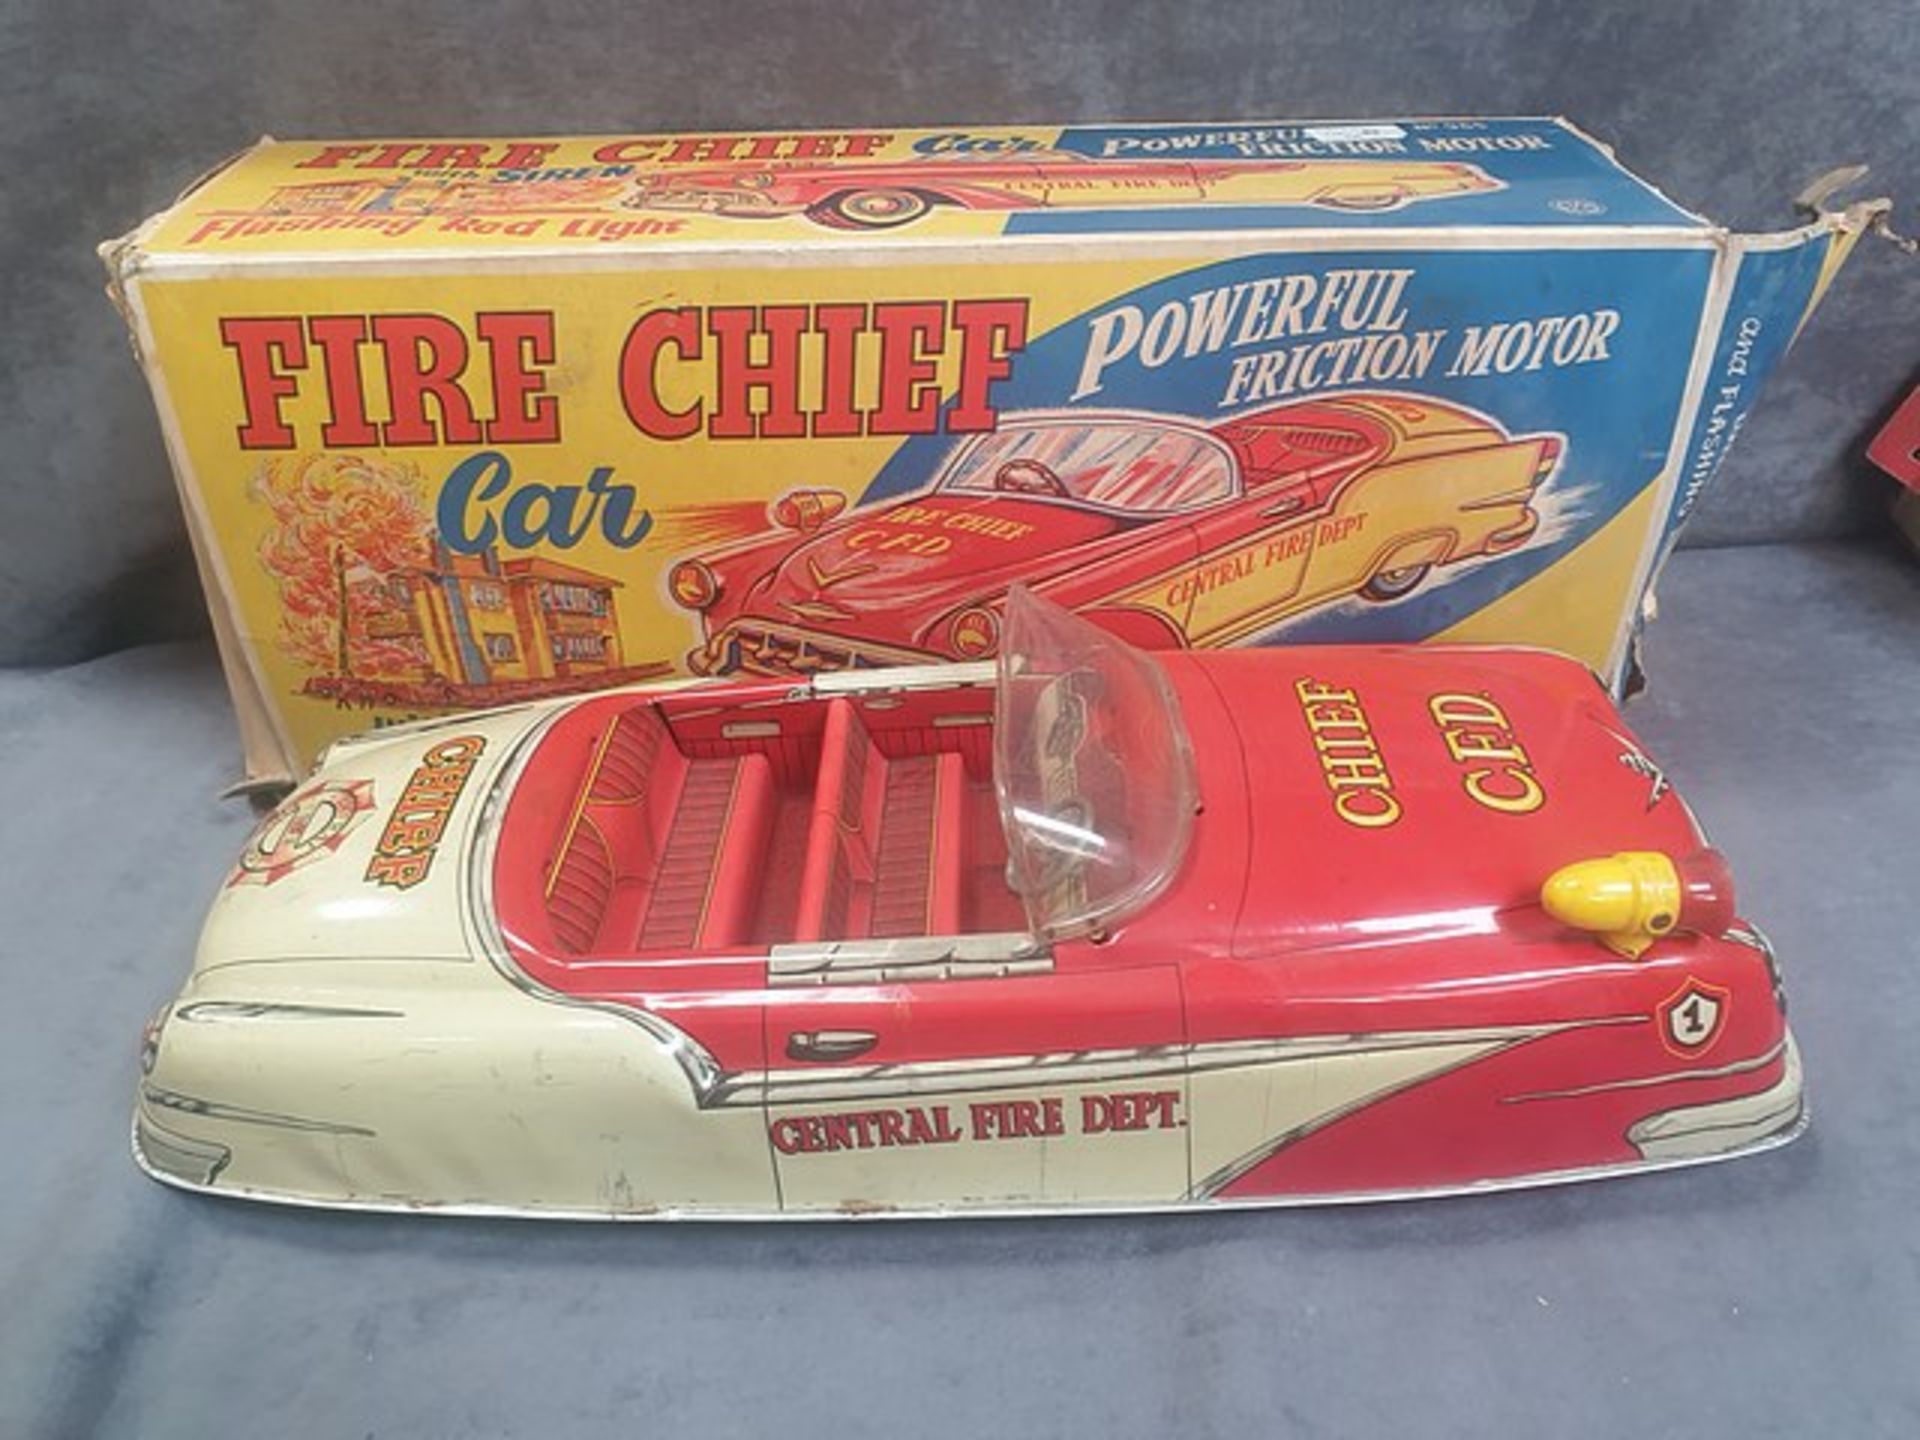 Marx Toys #965 Battery Operated Fire Chief Car With Siren, A Powerful Friction Motor And Flashing